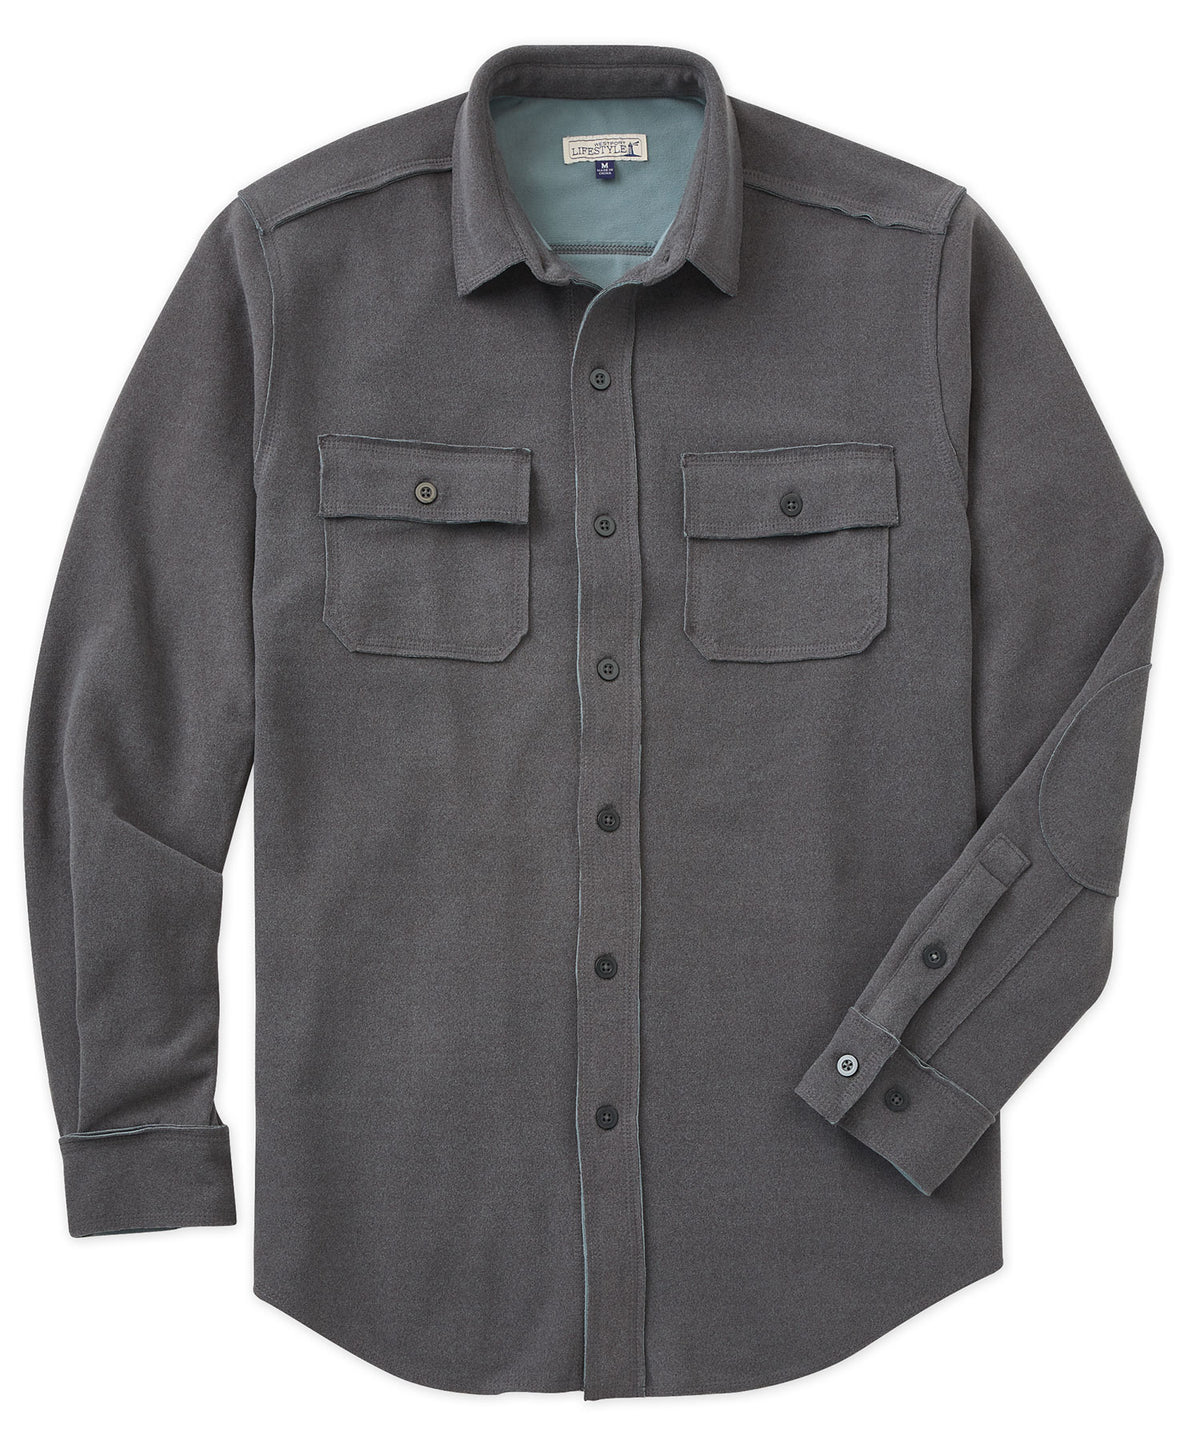 Westport Lifestyle Double Faced Performance Rough Edge Shirt Jacket, Big & Tall